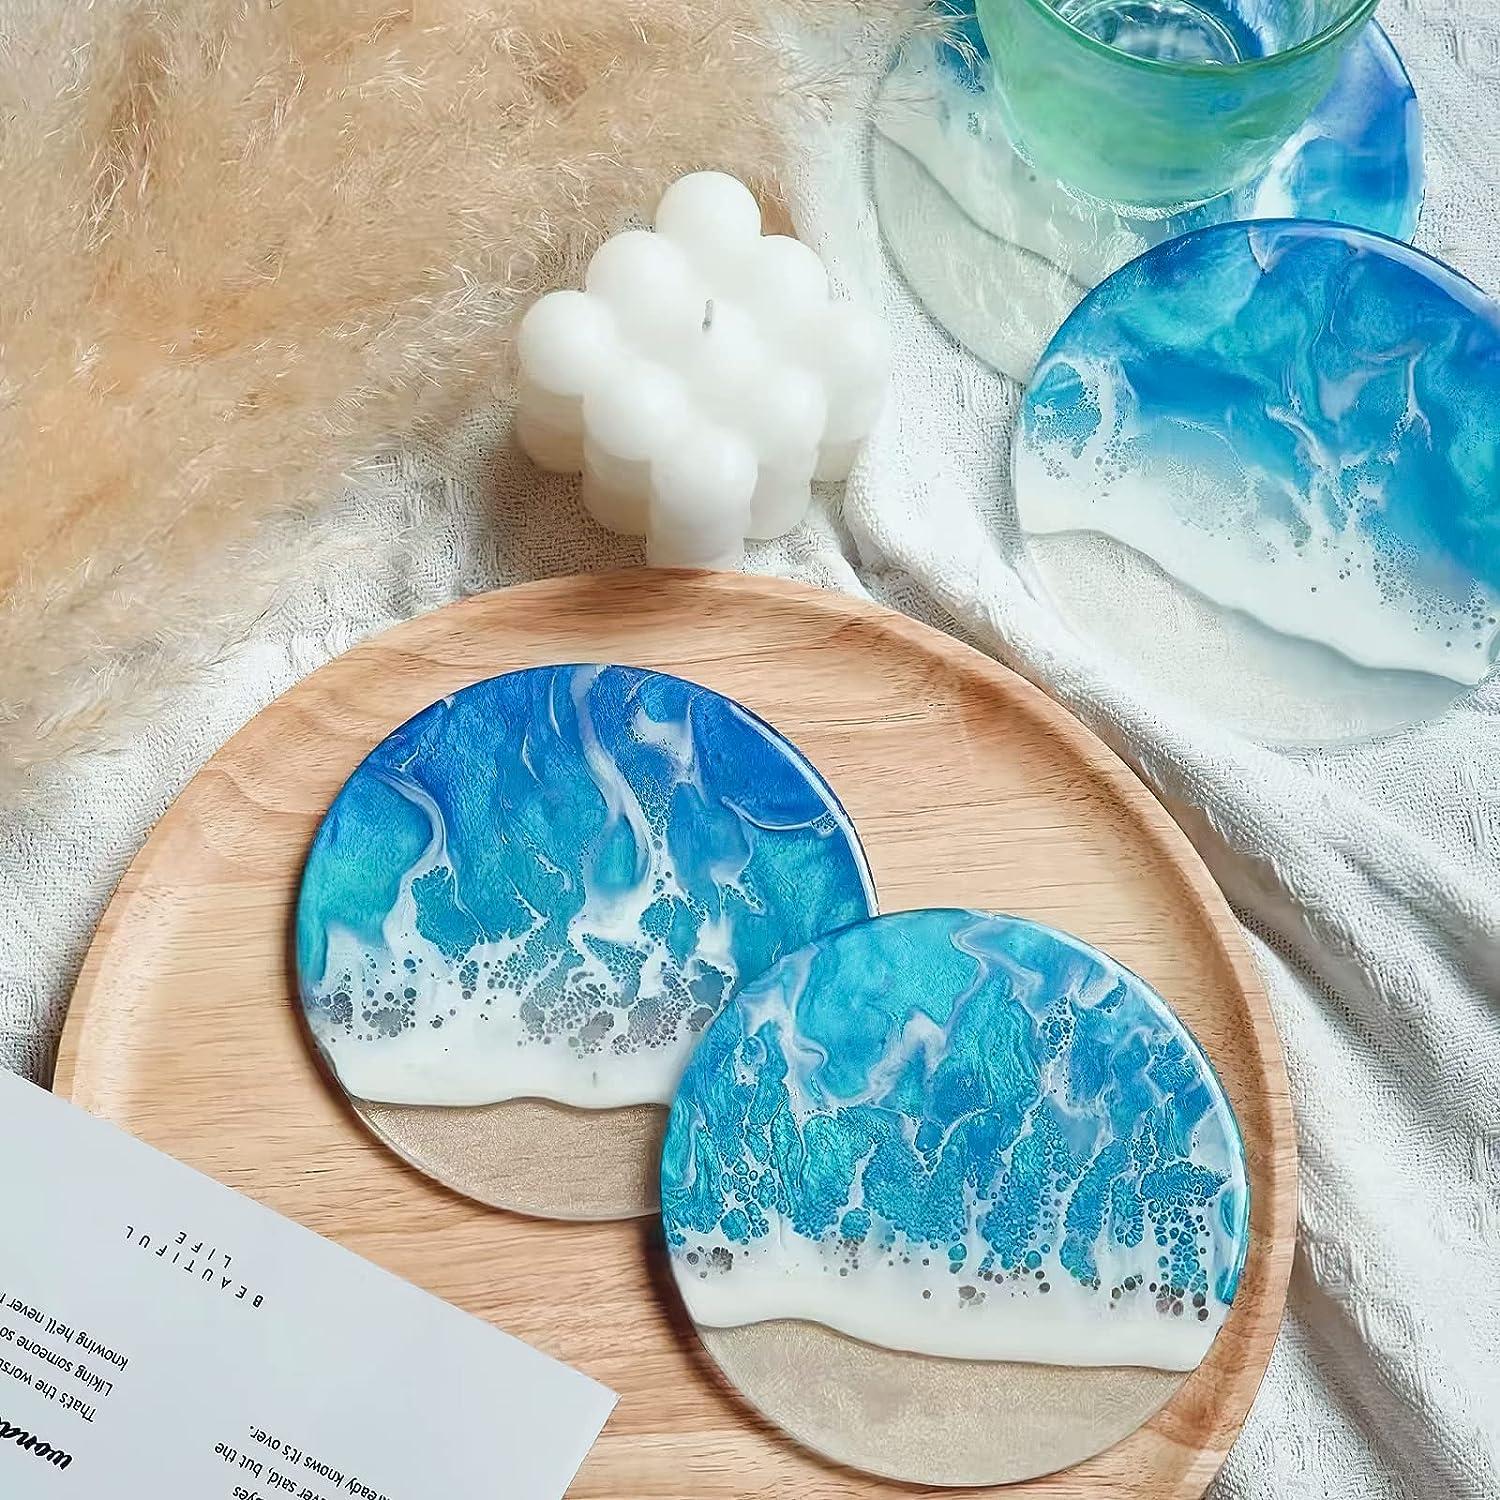 4 PCS Thickened Coaster Resin Molds, Coaster Silicone Molds for Epoxy Resin,  Coaster Molds for Resin Casting, Epoxy Resin Molds for DIY Resin Coasters  Bowl mats, Candle Holders, Home Decoration. 4pcs